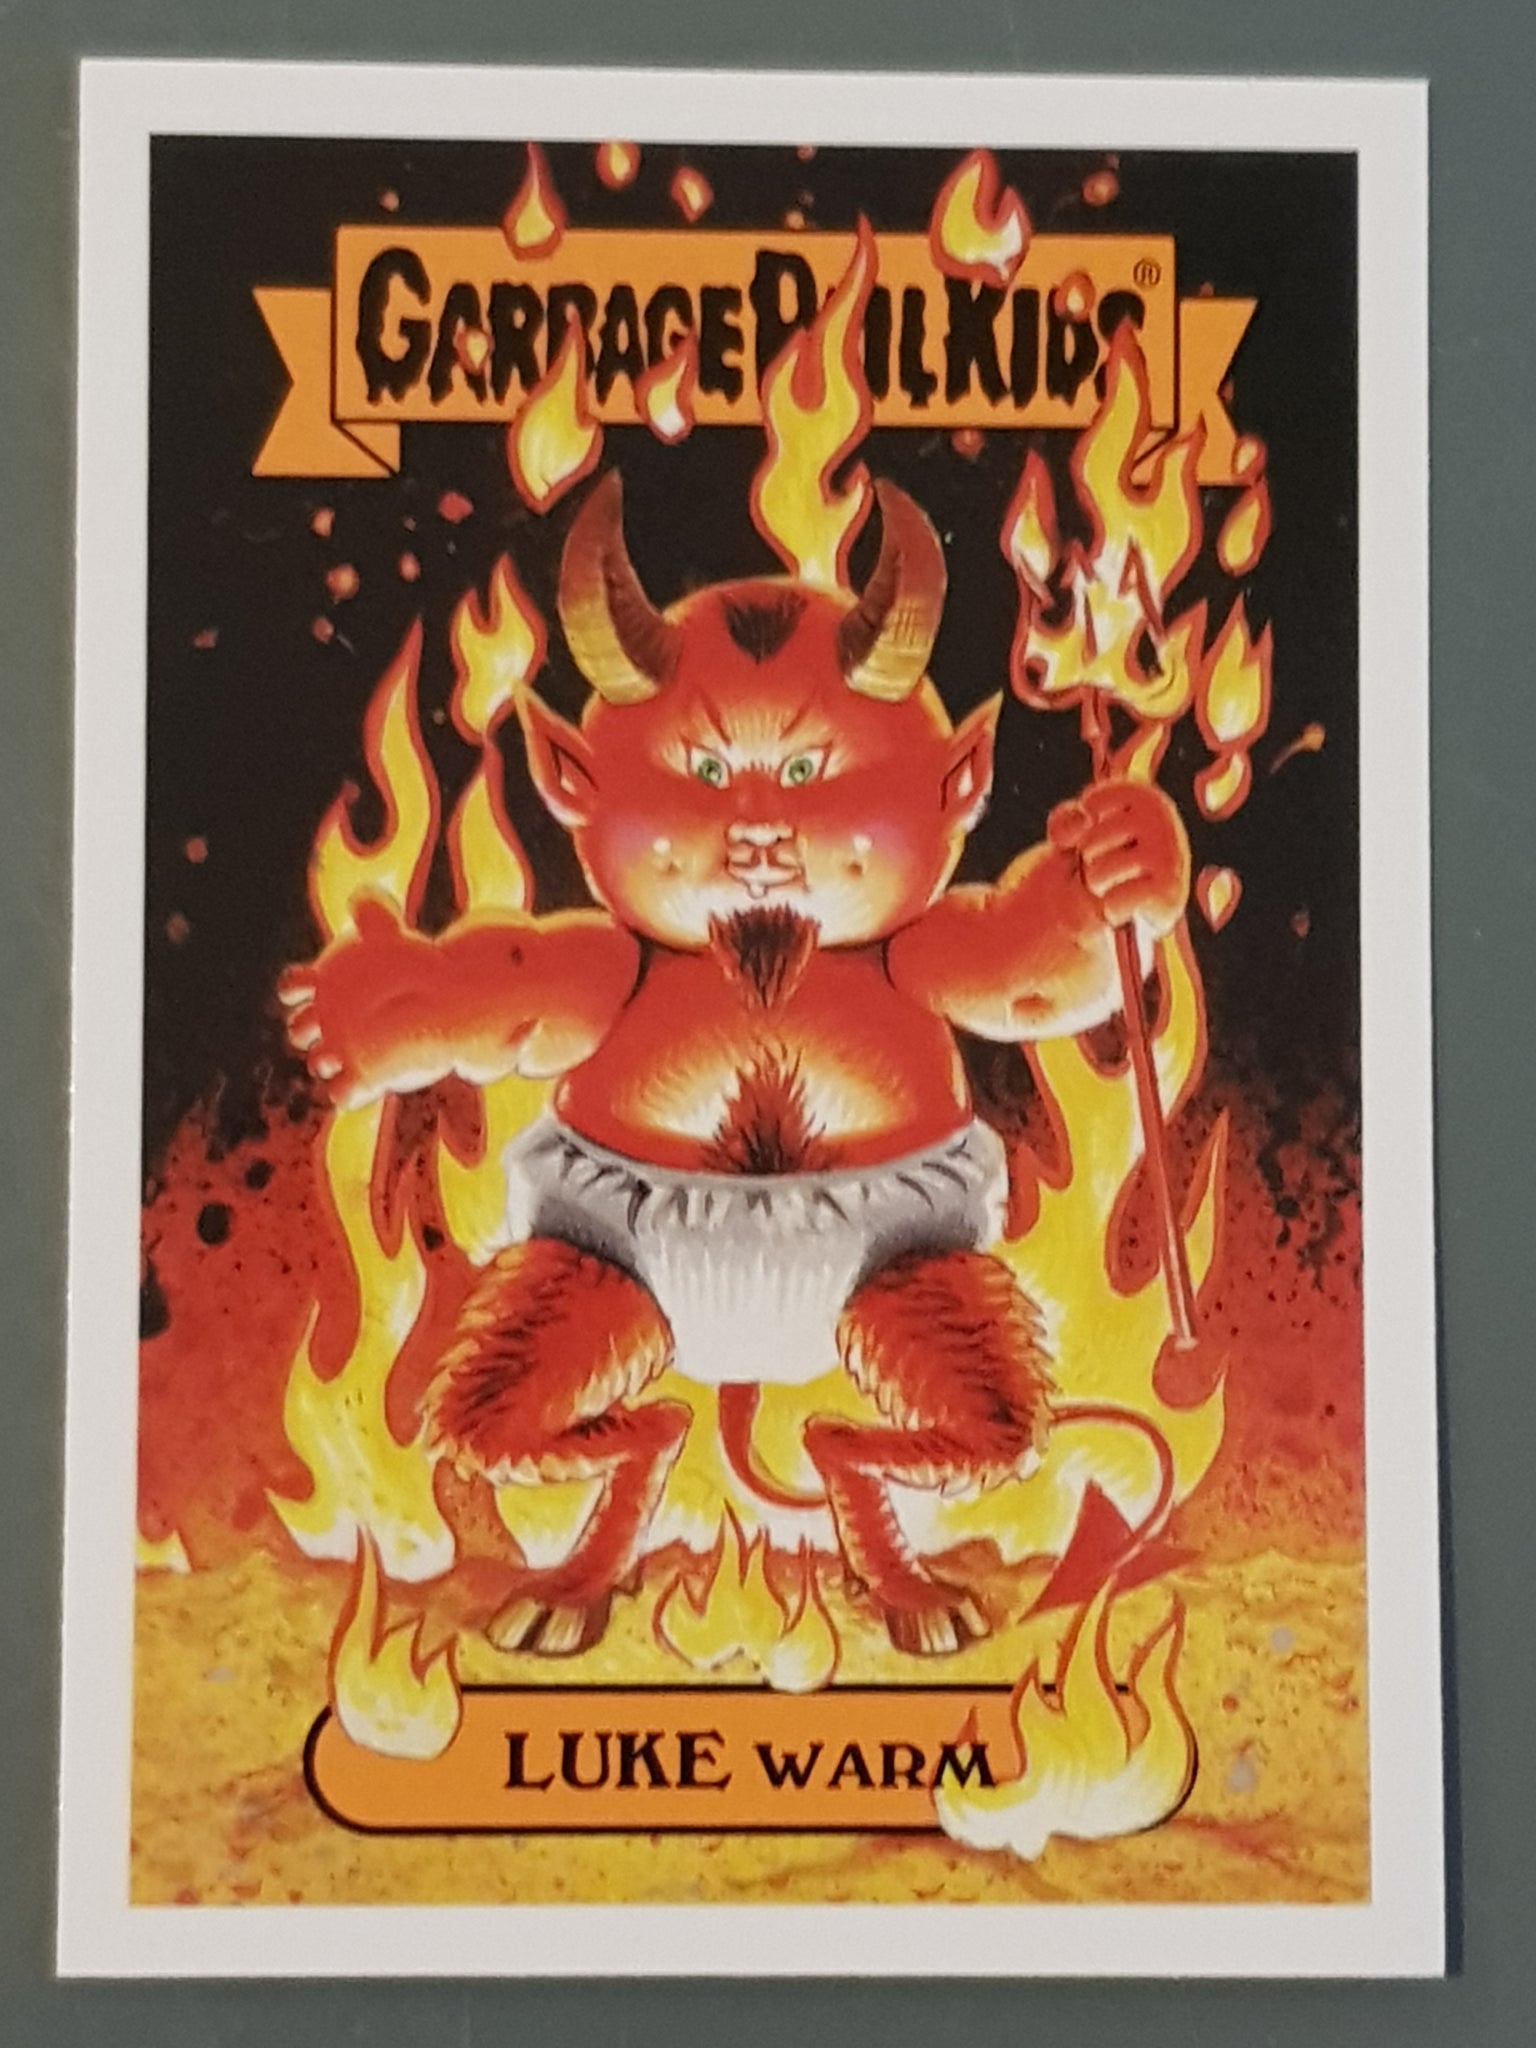 Garbage Pail Kids Oh the Horror-Ible Classic Monsters #7b - Luke Warm Trading Card